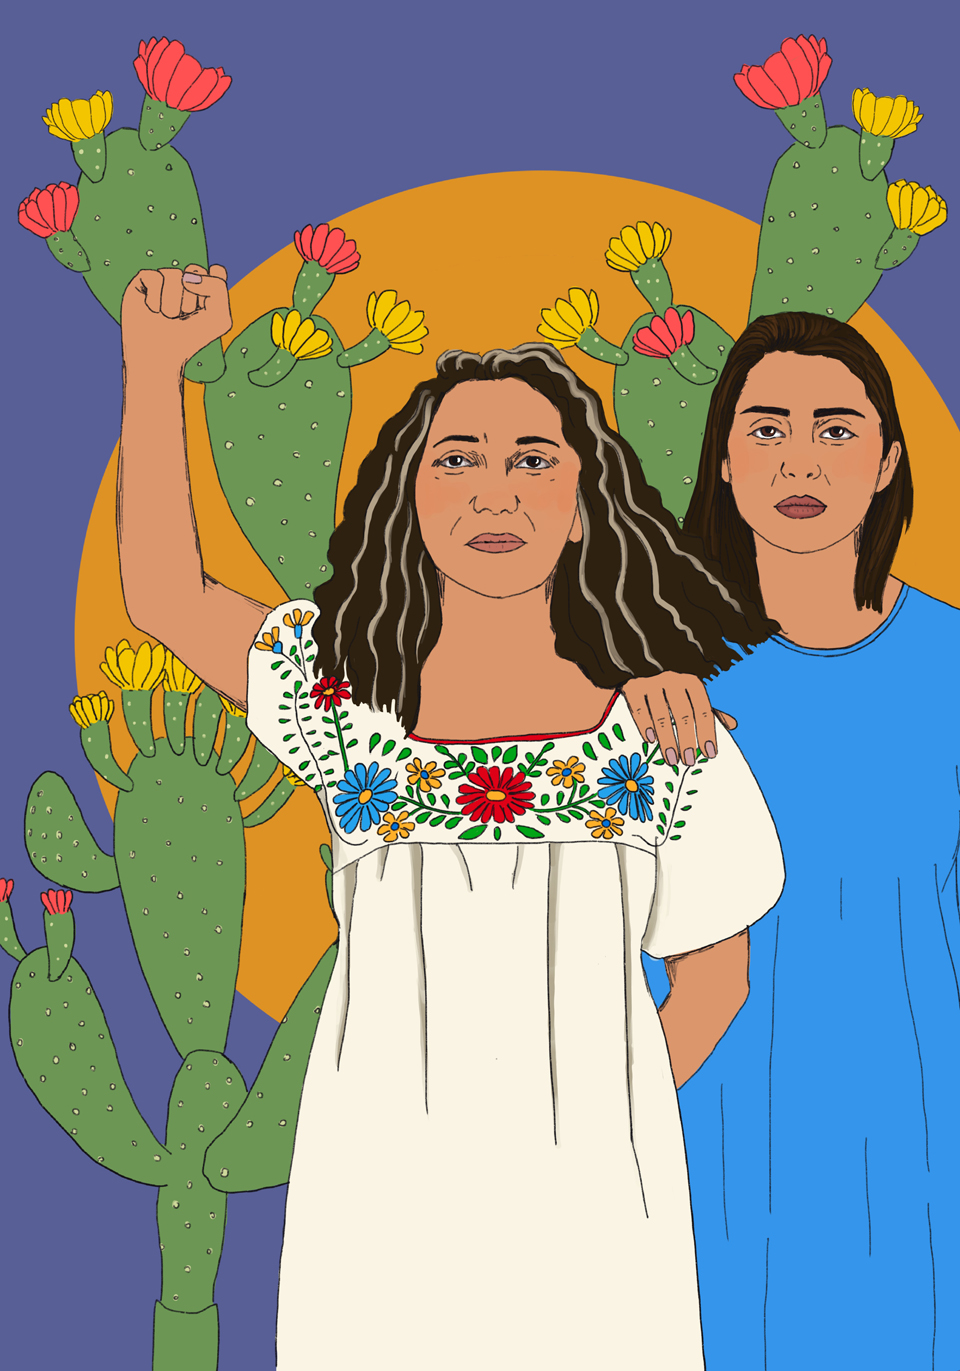 Illustration of two women, one with a fist in the air, the other with her hand on the first woman's shoulder.